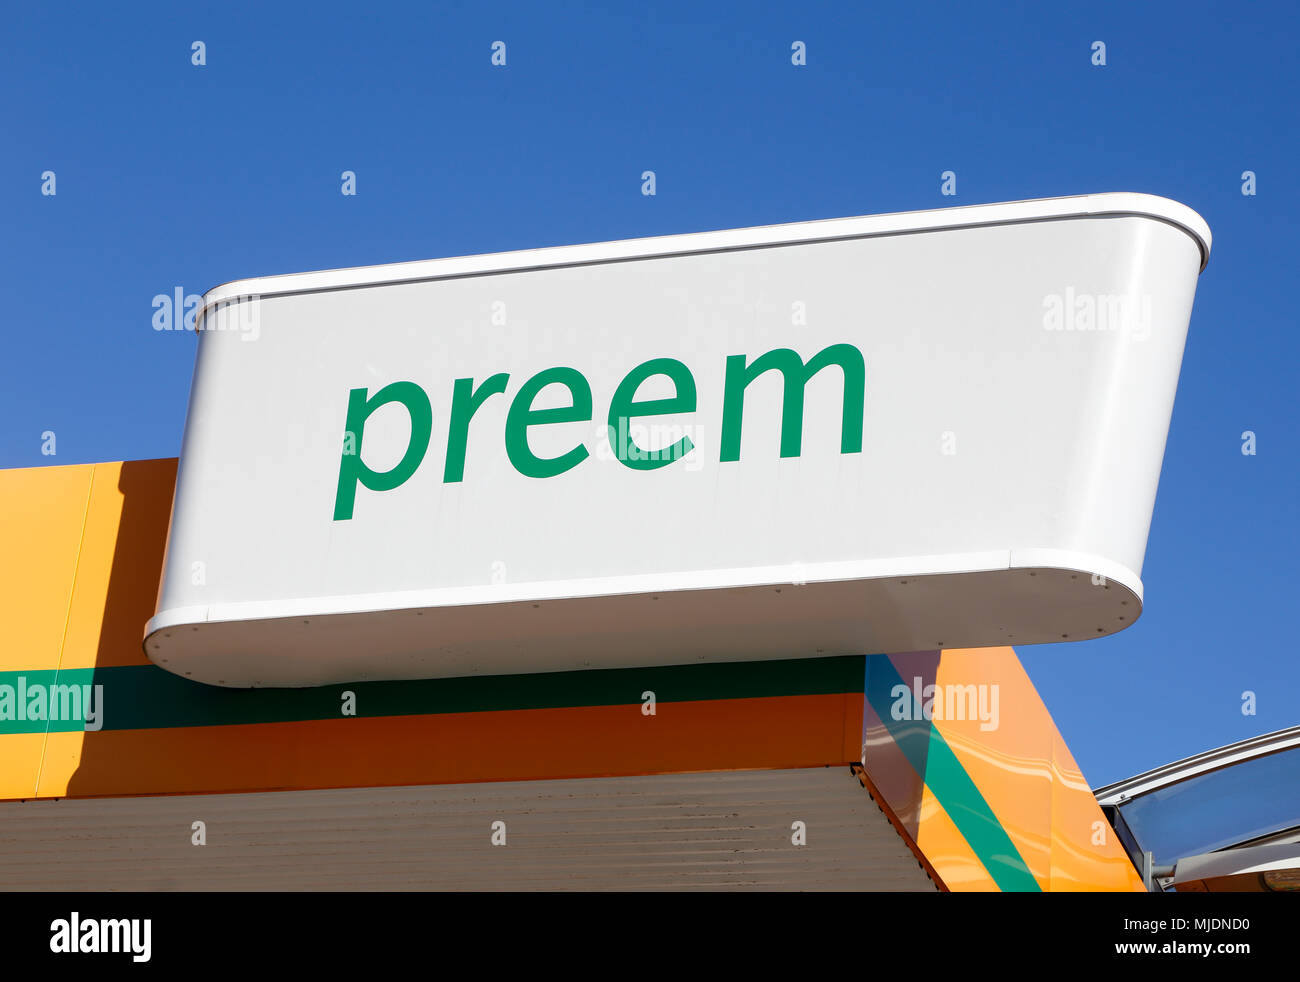 Soderhamn, Sweden - July 18, 2016: Closeup of the gasoline brand Preem service station sign located on the shelter. Stock Photo